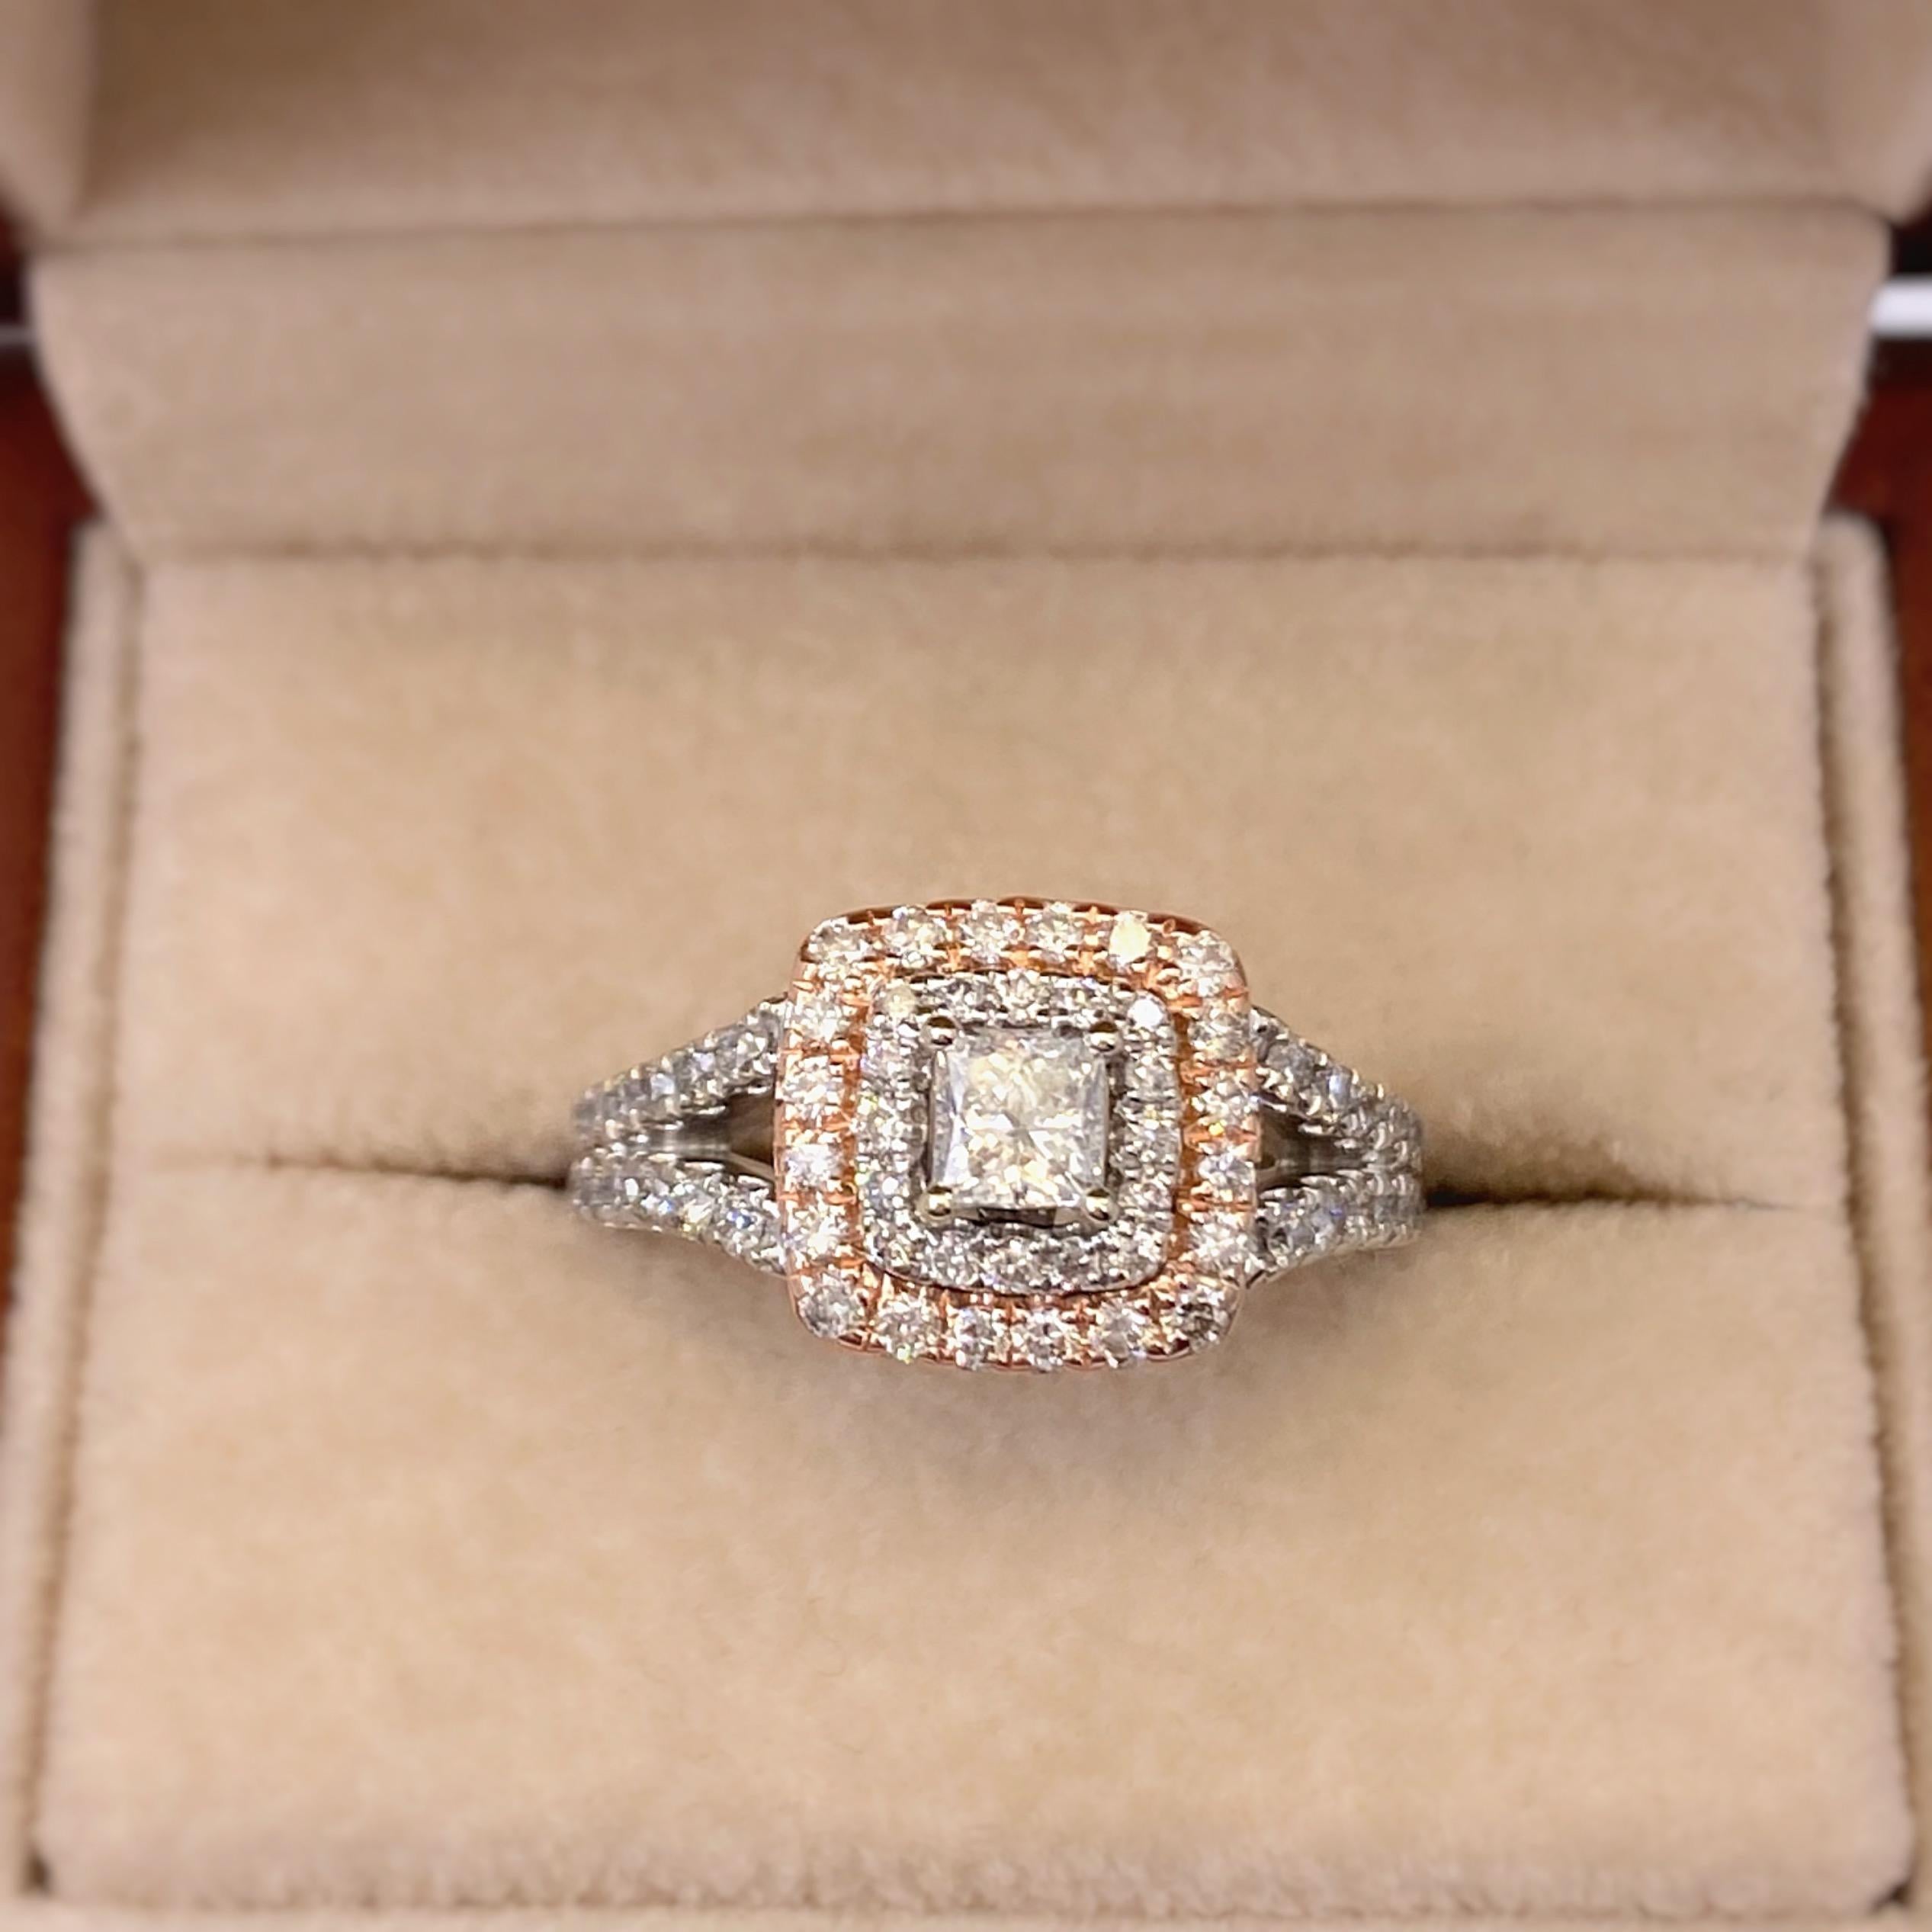 Princess Diamond Double Halo Split Shank Engagement Ring
Style:  Double Halo
Metal:  14kt White Gold & Rose Gold
Size:  5.5 - sizable
TCW:  1.00 tcw
Main Diamond:  Princess Cut Diamond 0.32 cts 
Color & Clarity:  G color - SI2 clarity
Accent